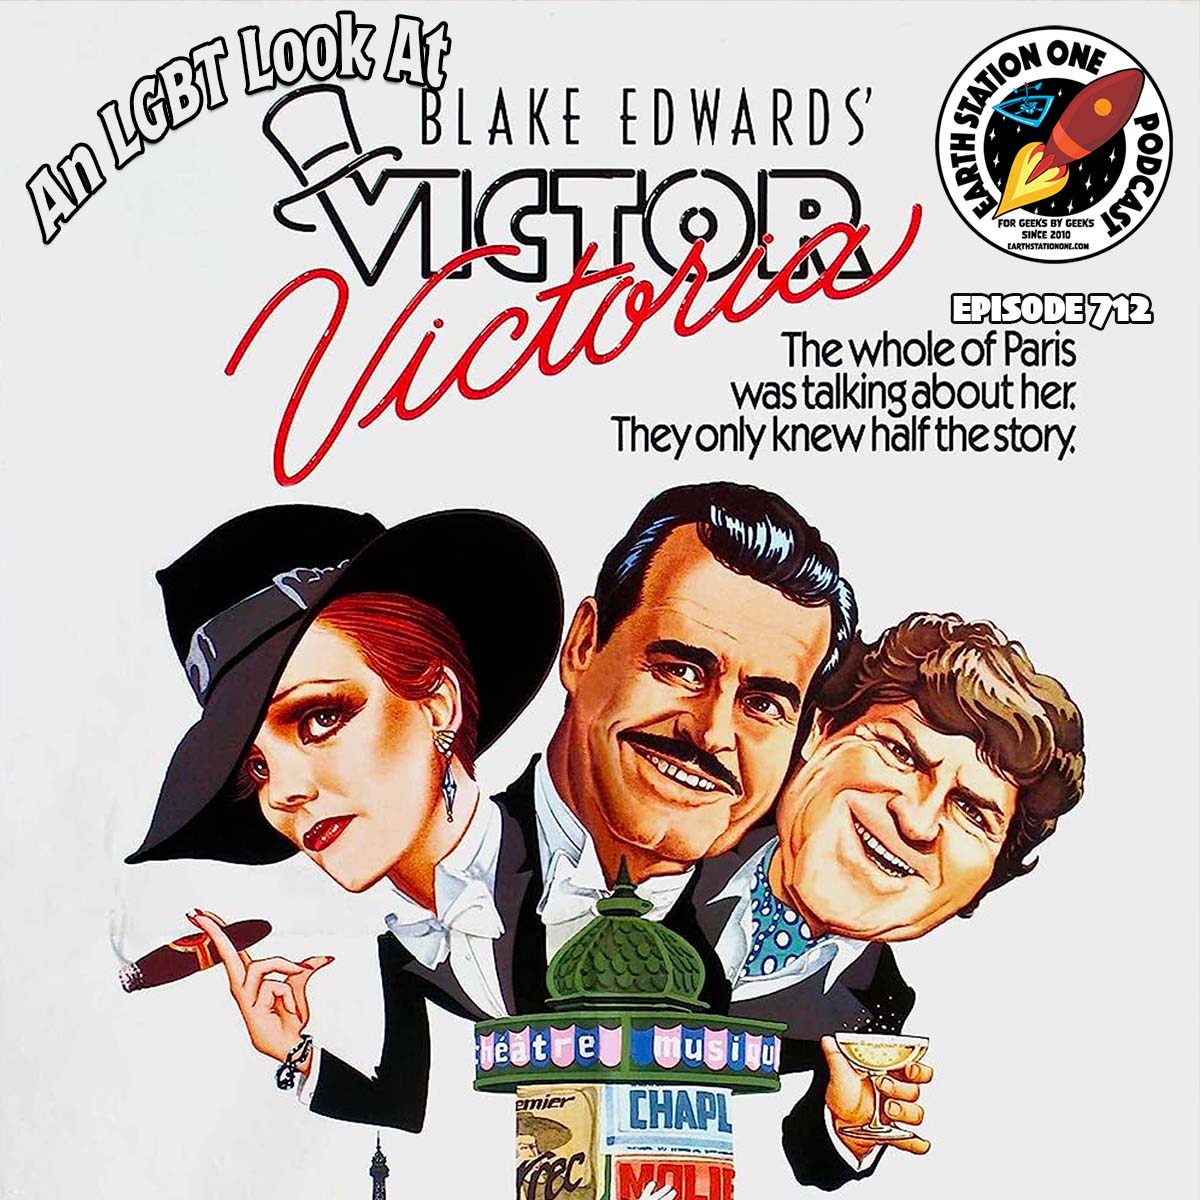 An LGBT Look At Victor / Victoria | Earth Station One Ep 712